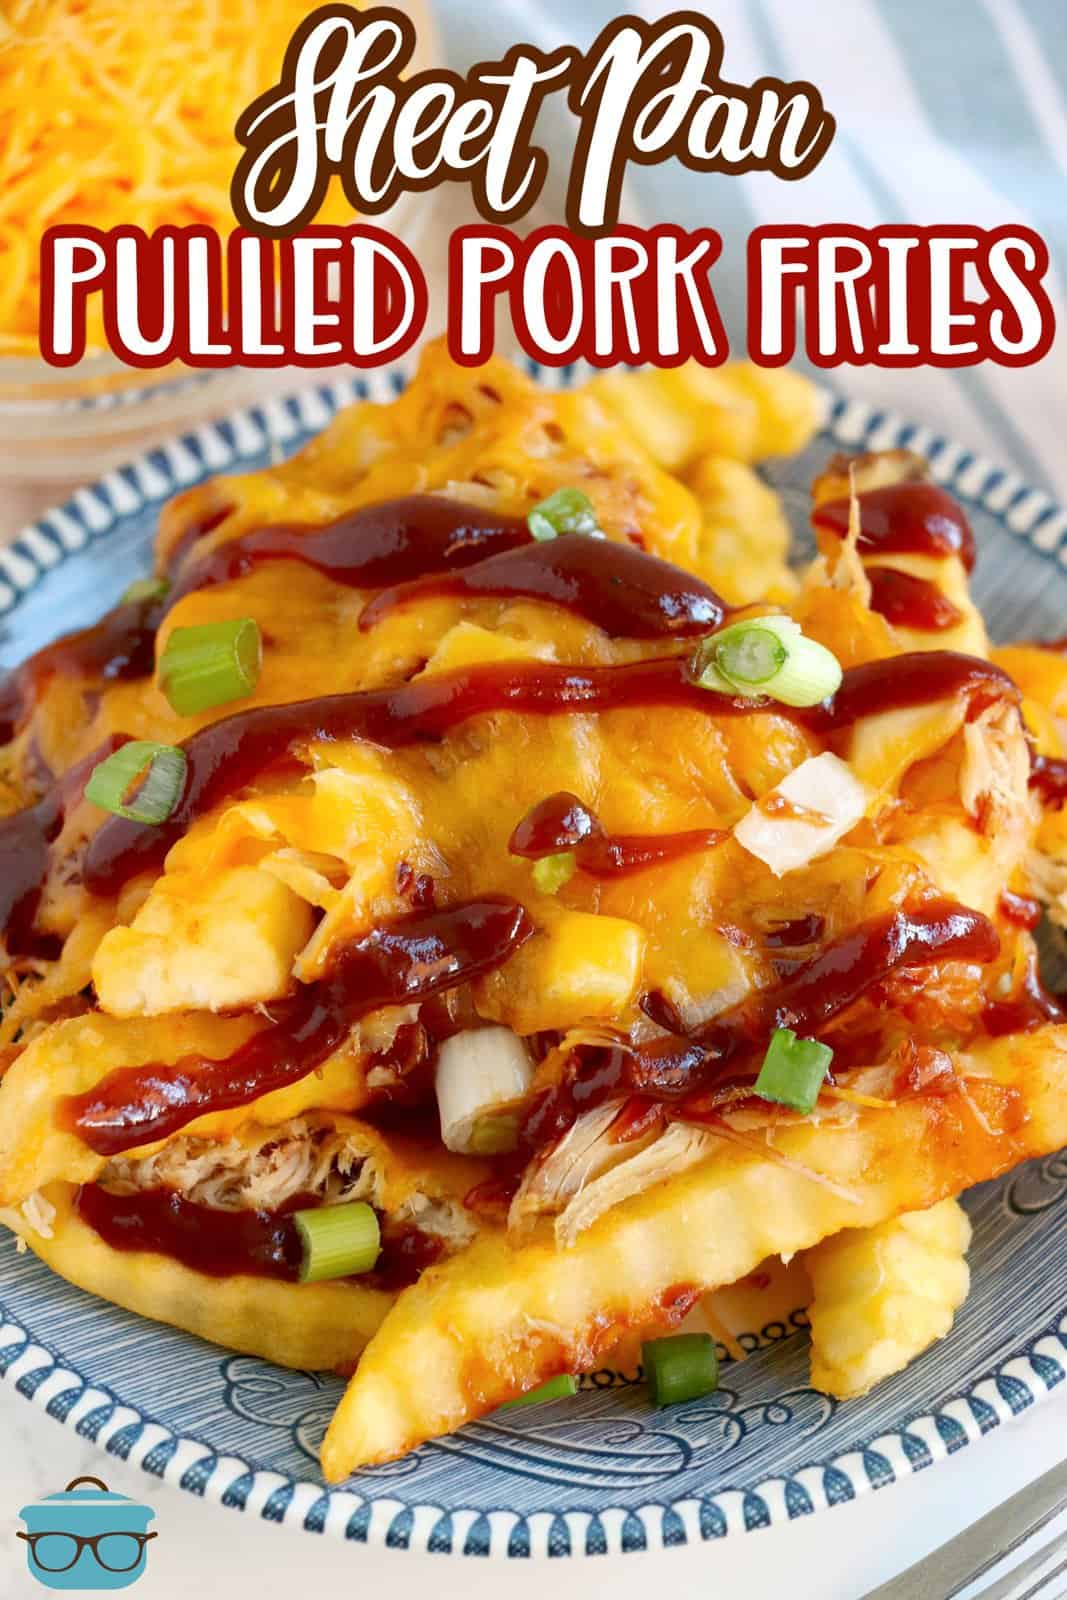 Pinterest image of Sheet Pan Pulled Pork French Fries on plate drizzled with bbq sauce.